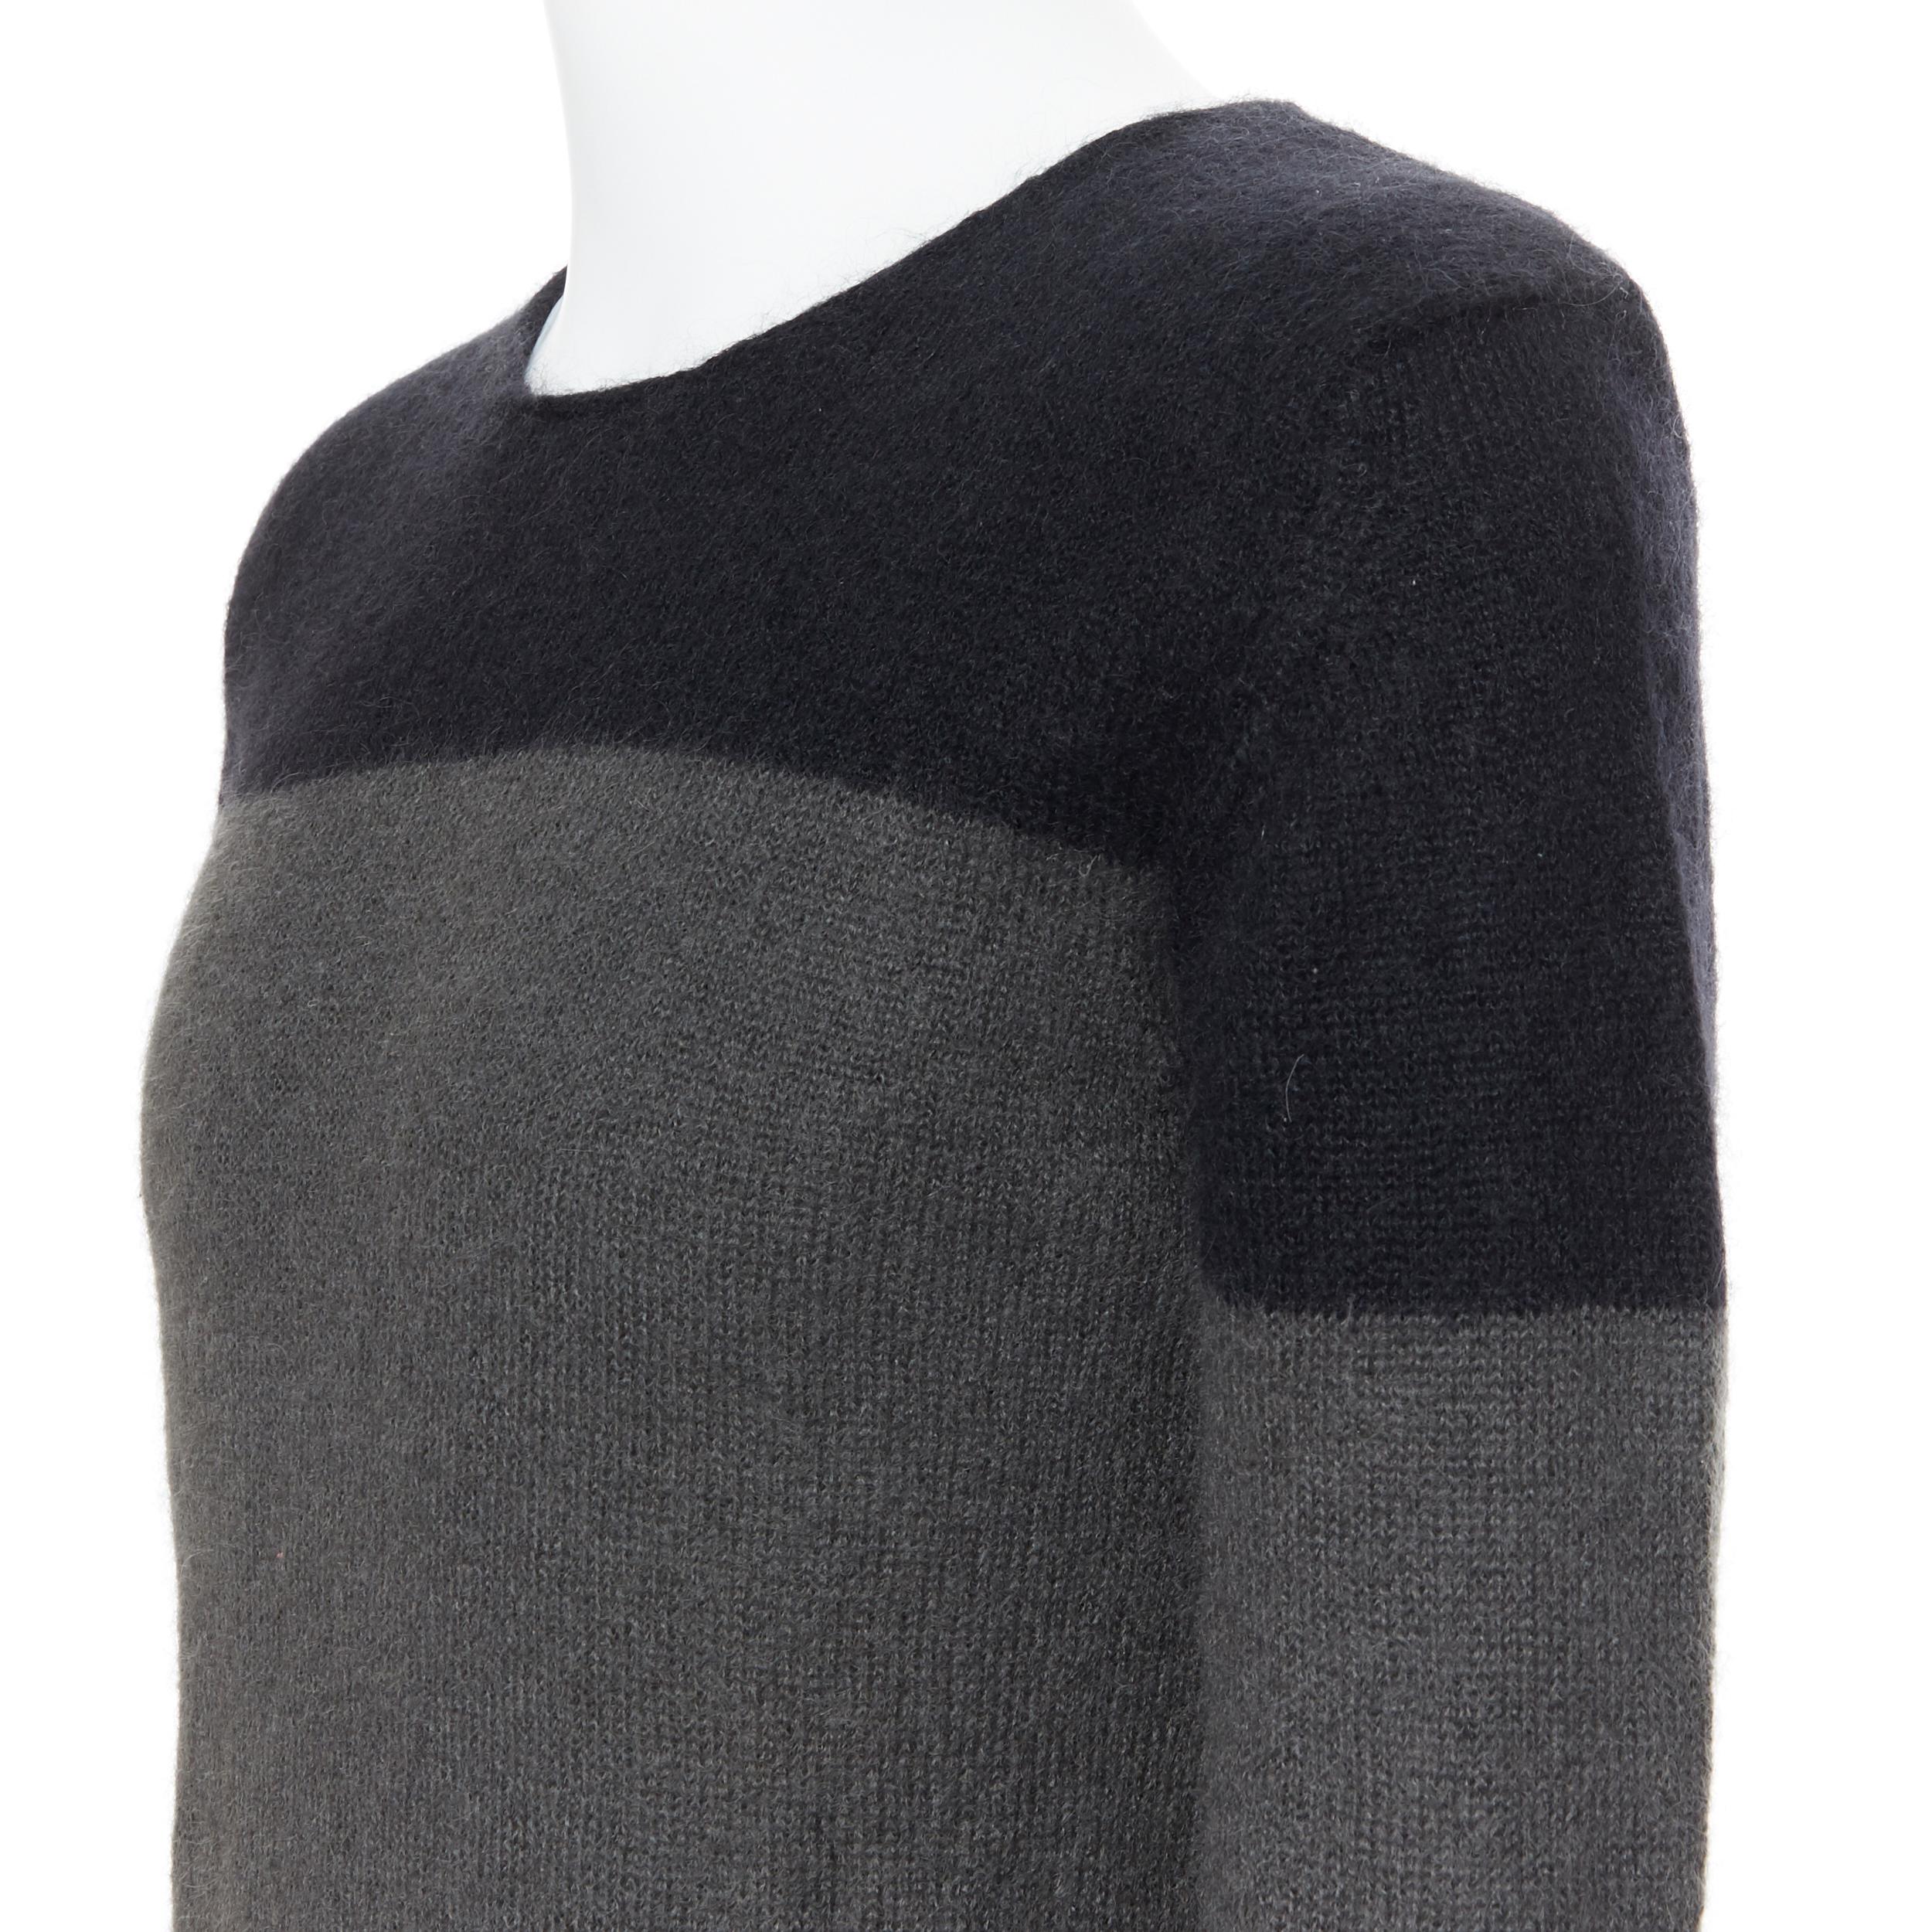 ANN DEMEULEMEESTER mohair wool black grey colorblocked sweater S
Brand: Ann Demeulemeester
Model Name / Style: Sweater
Material: Mohair, wool
Color: Grey
Pattern: Solid
Extra Detail: Pullover sweater.
Made in: Belgium

CONDITION: 
Condition: